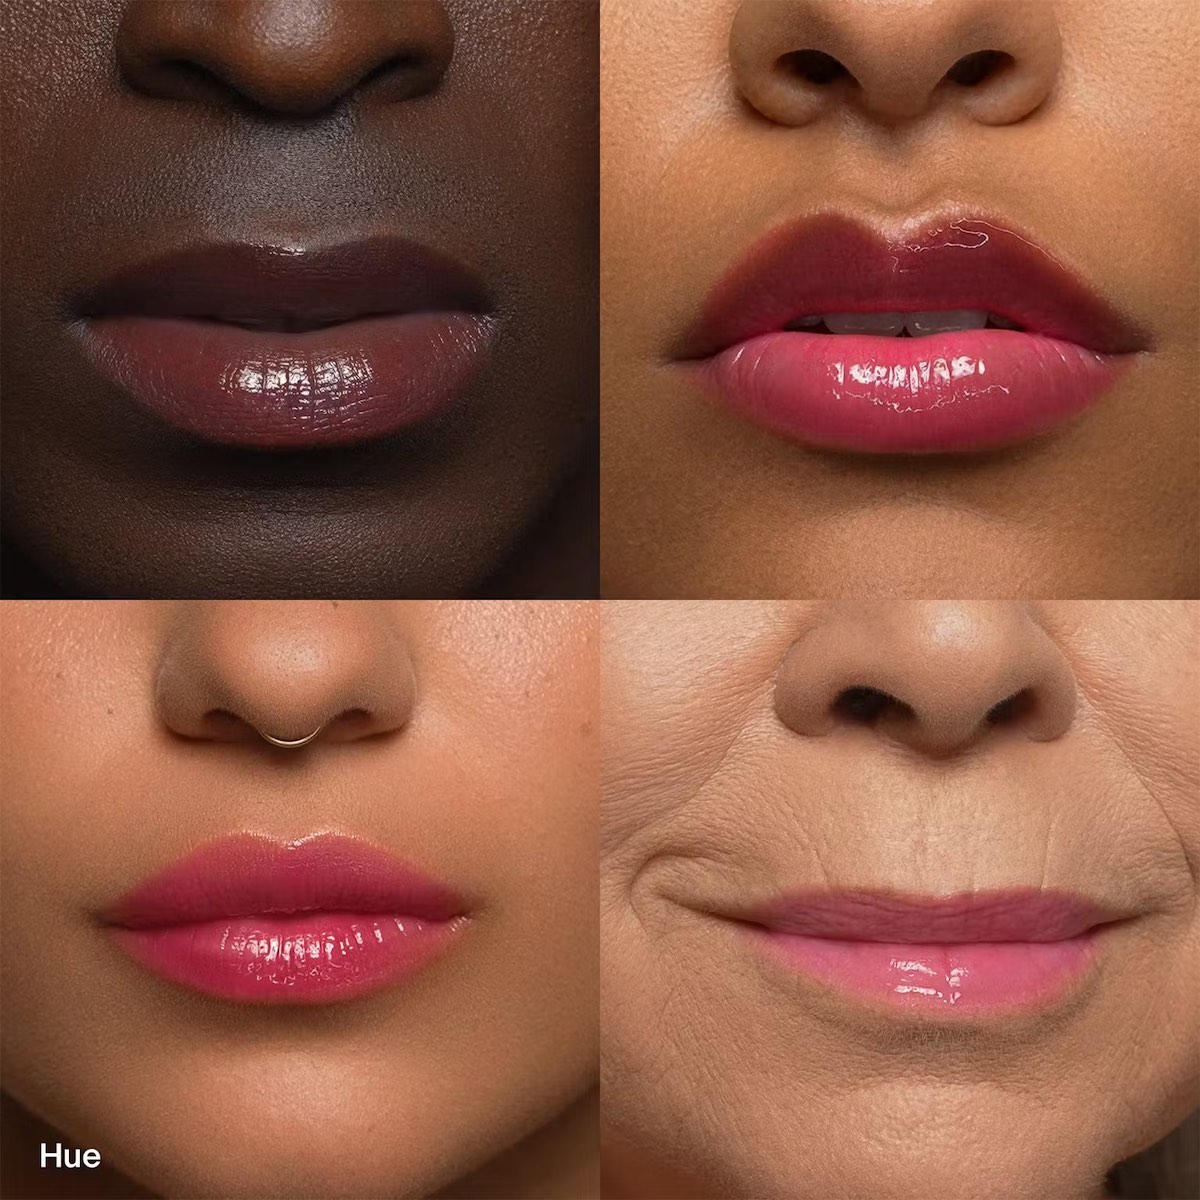 HAUS LABS Lip Oil Hue Swatches